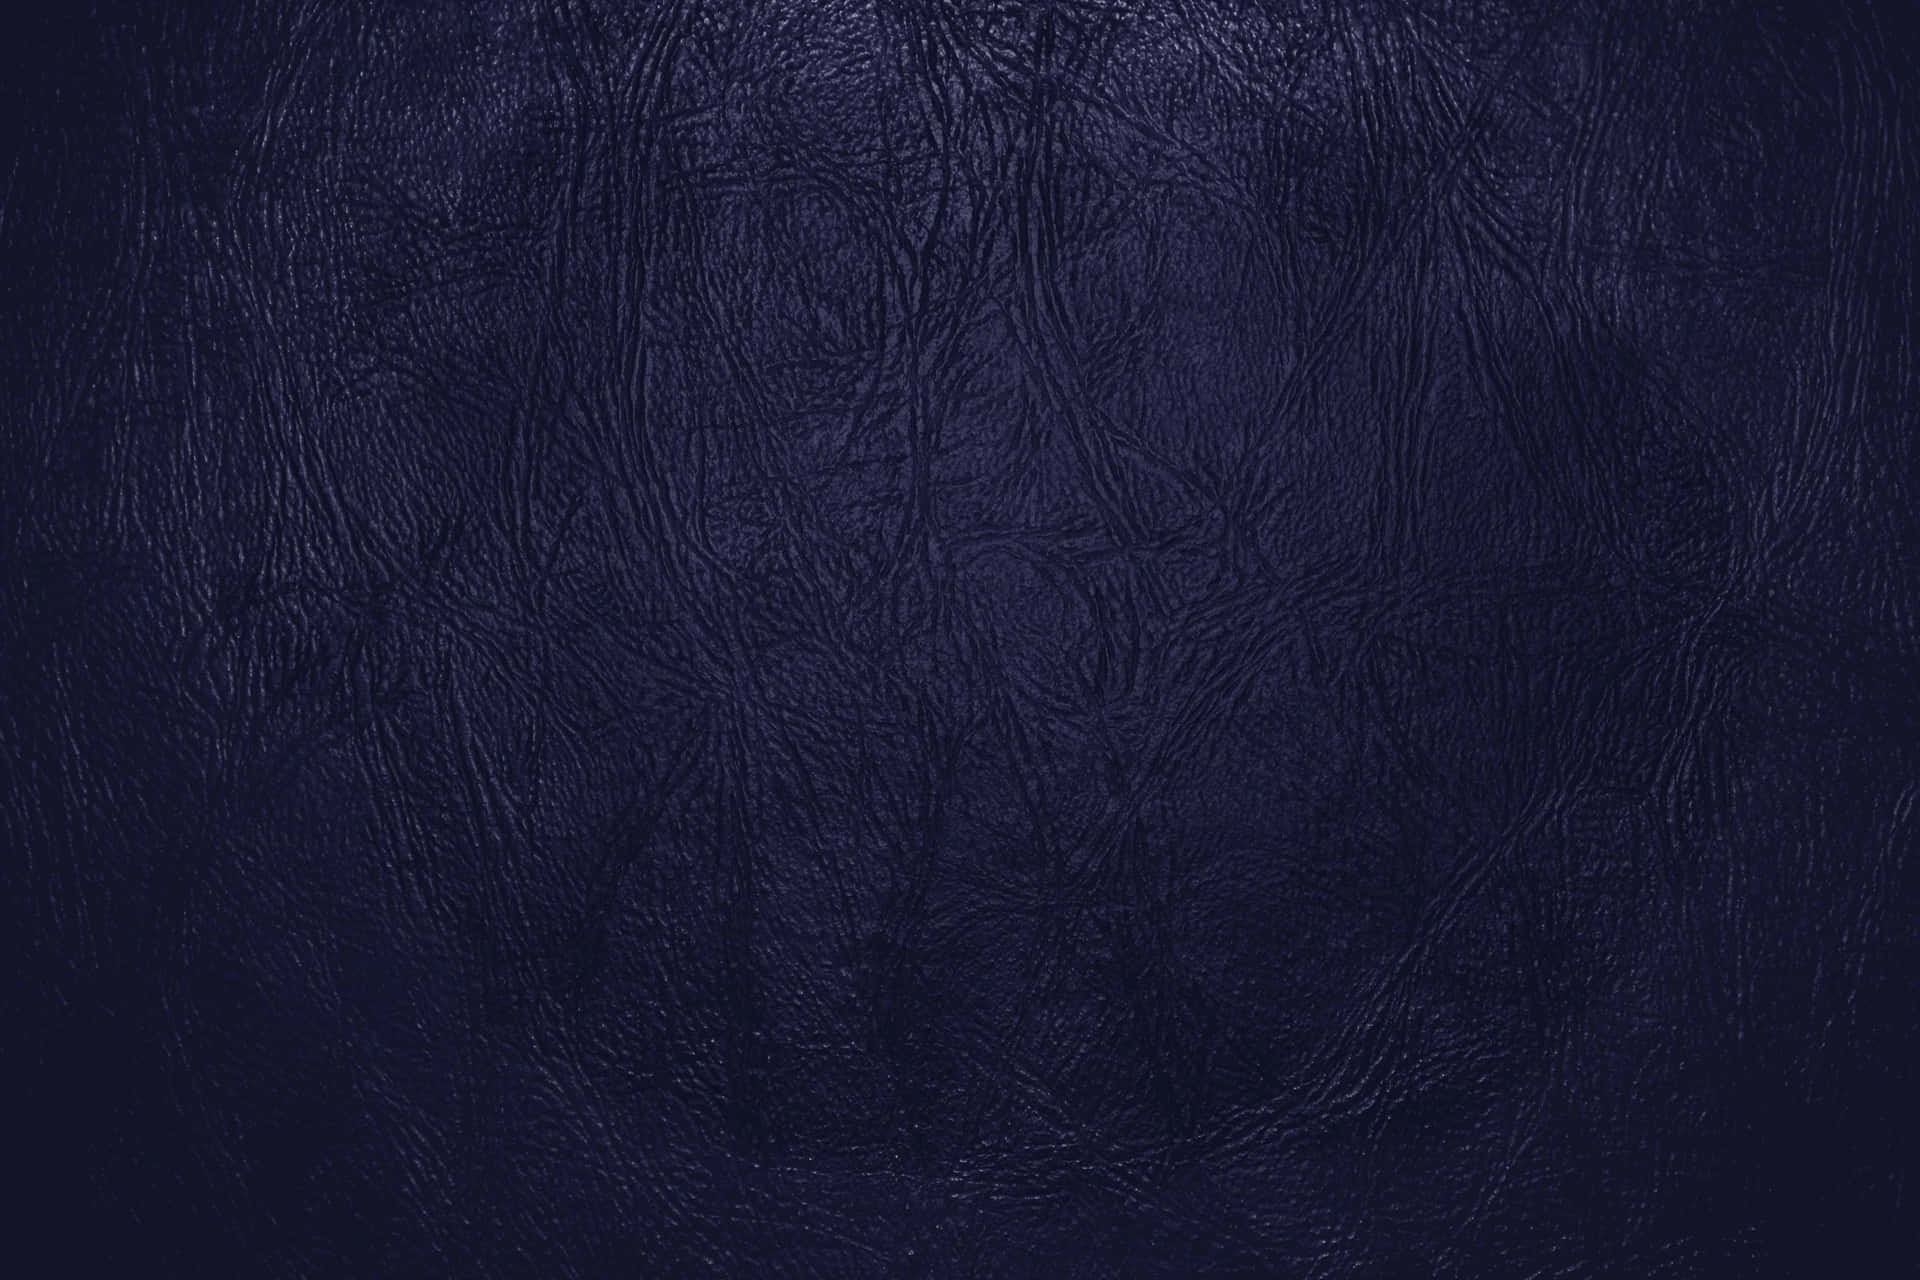 Dark Navy Blue Background With Leather Texture